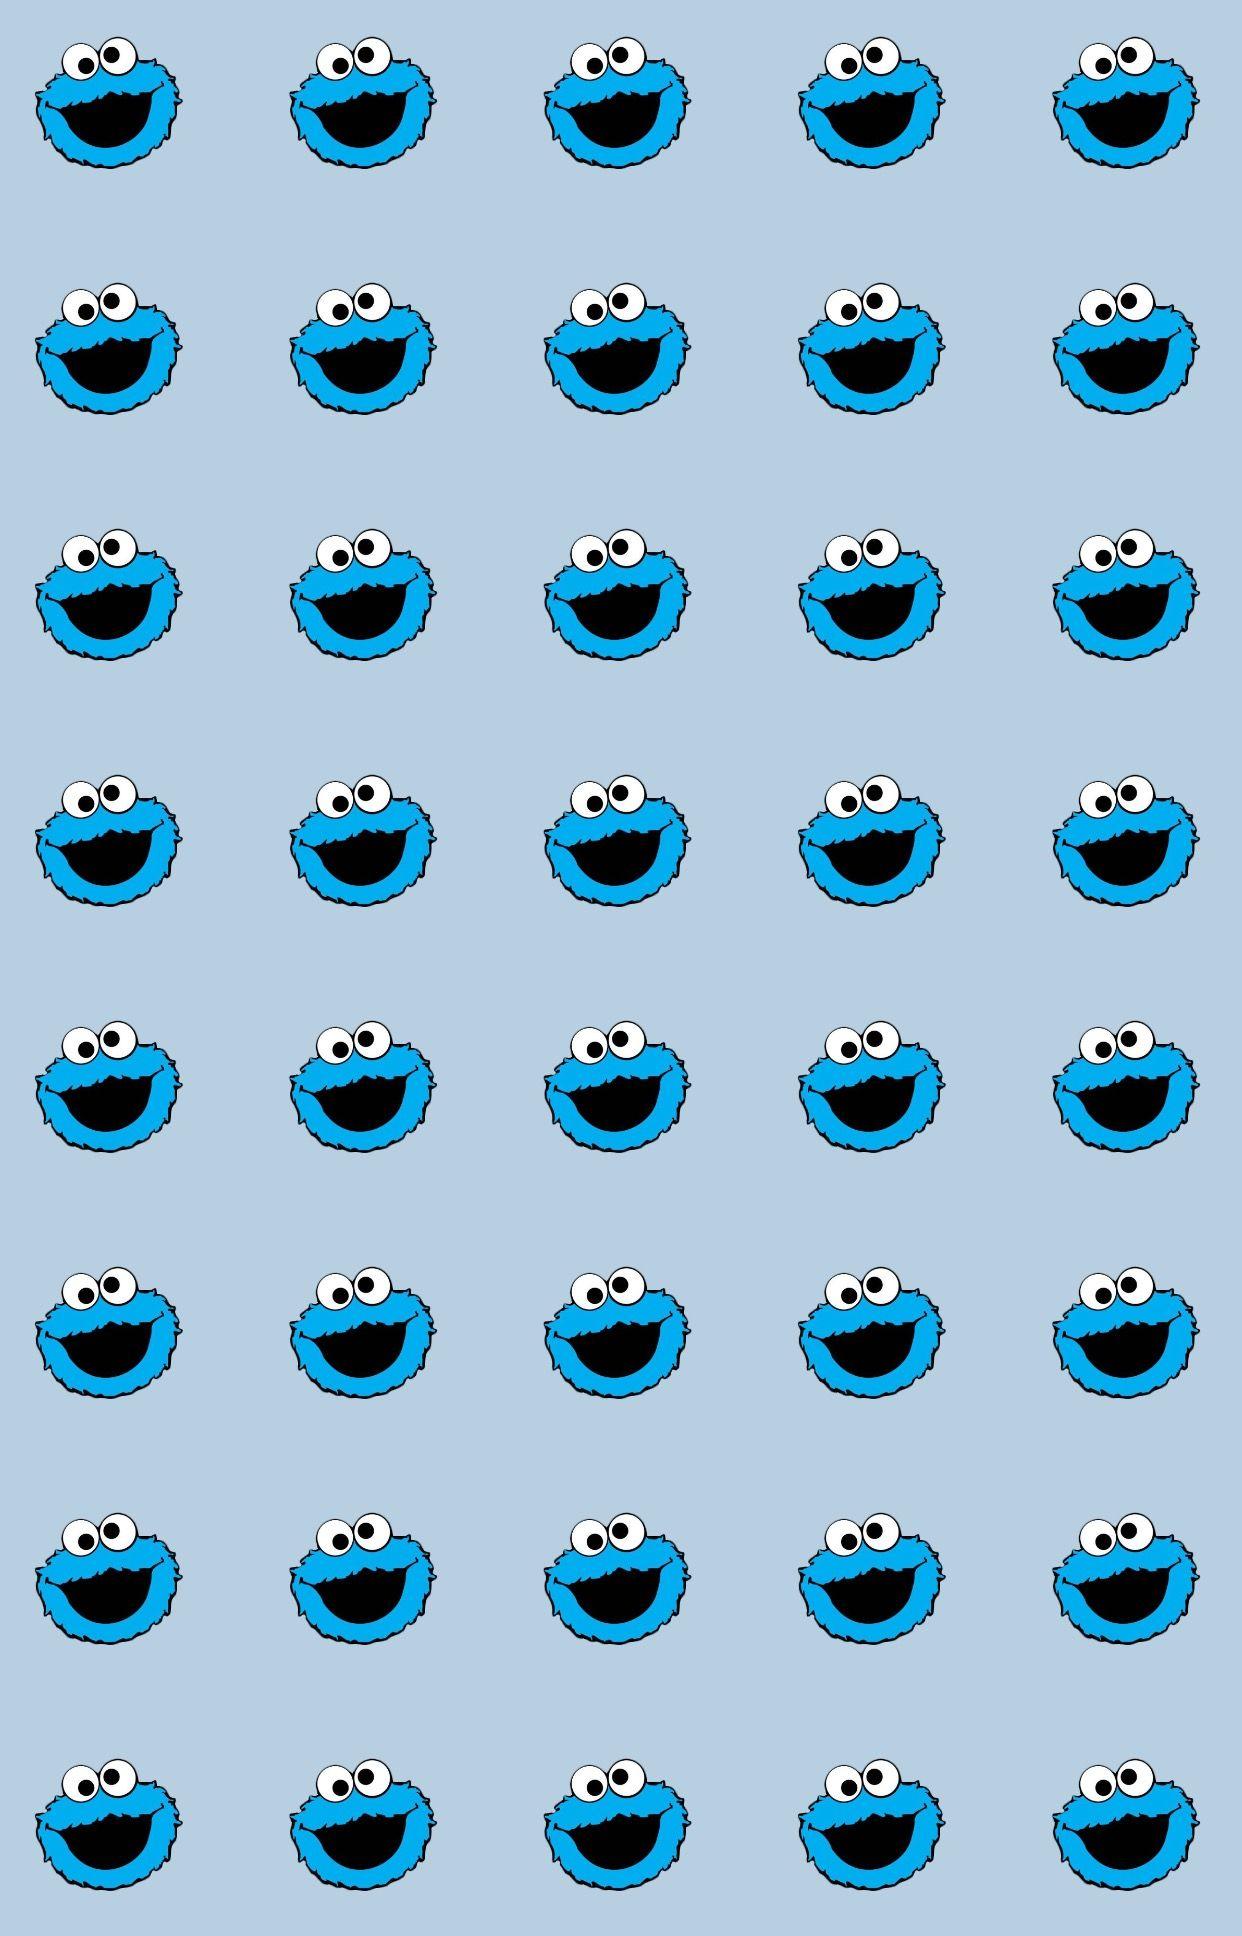 Cute Cookie Monster Wallpaper 58 images